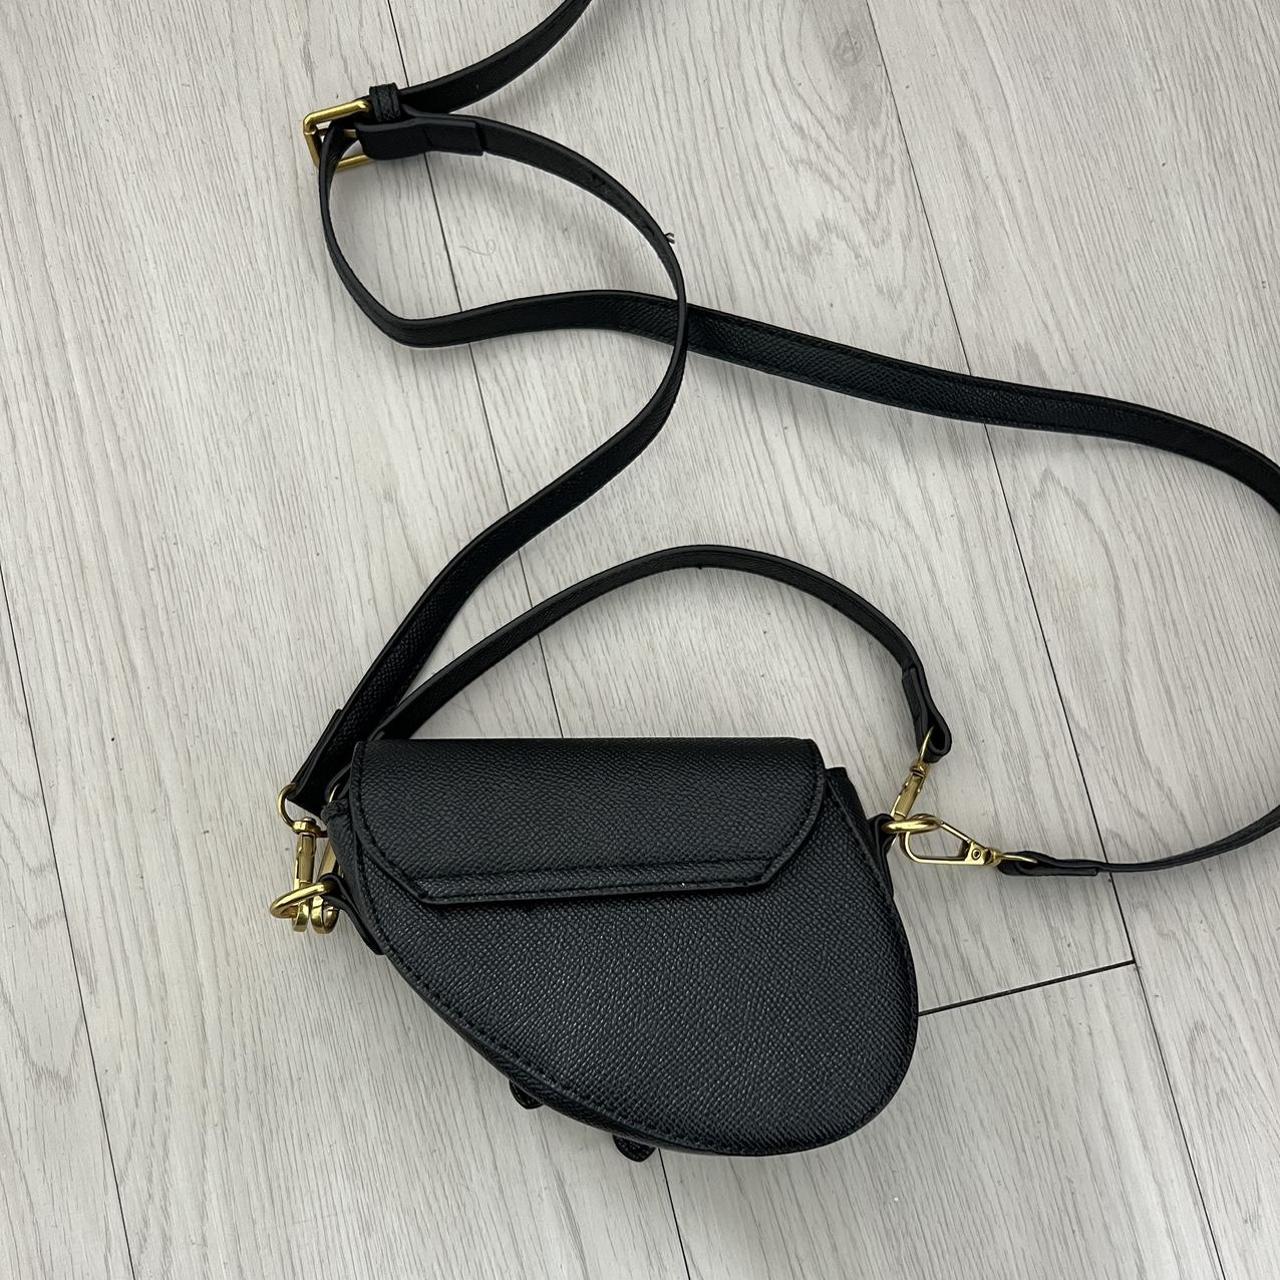 Dior Women's Black and Gold Bag (3)